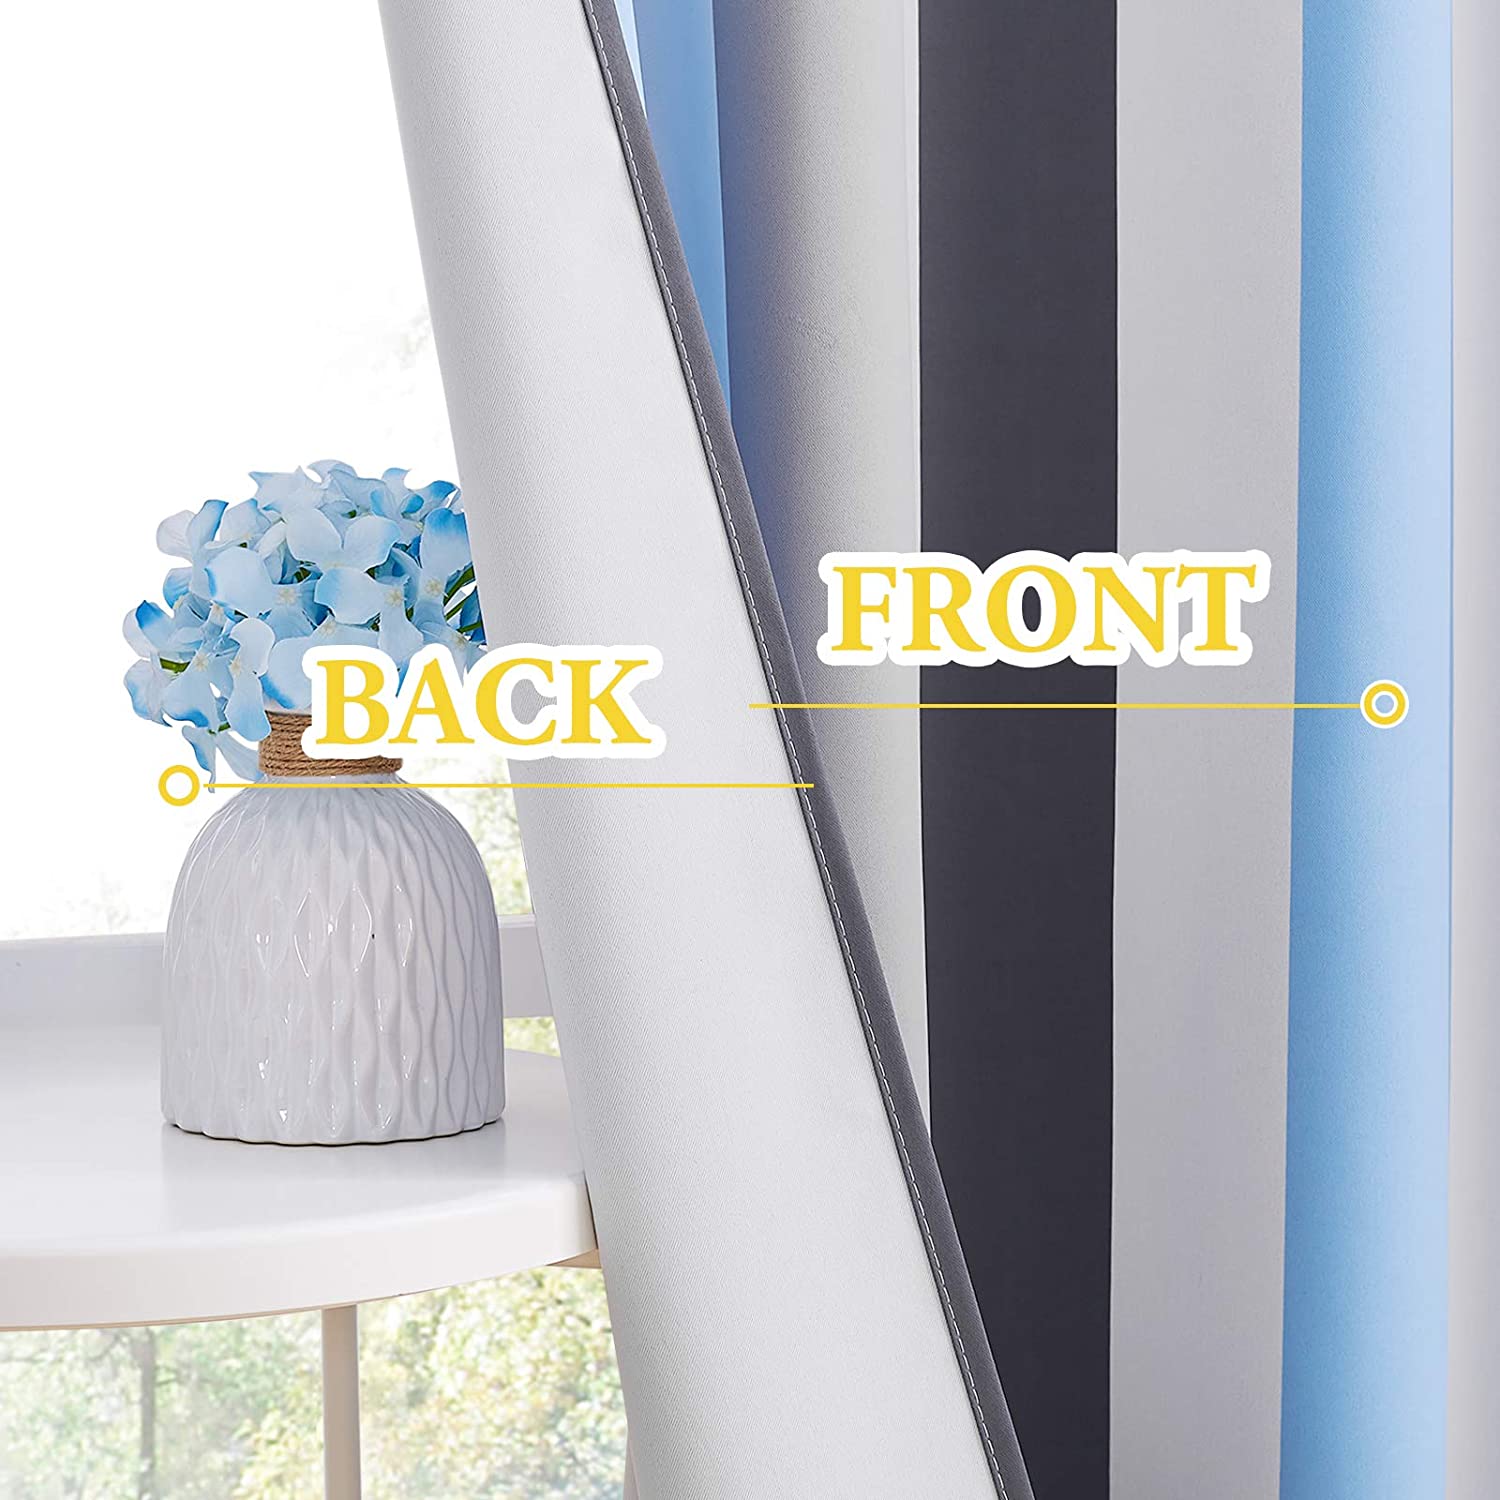 Striped Grommet Blackout Curtains For Living Room And Bedroom 2 Panels KGORGE Store